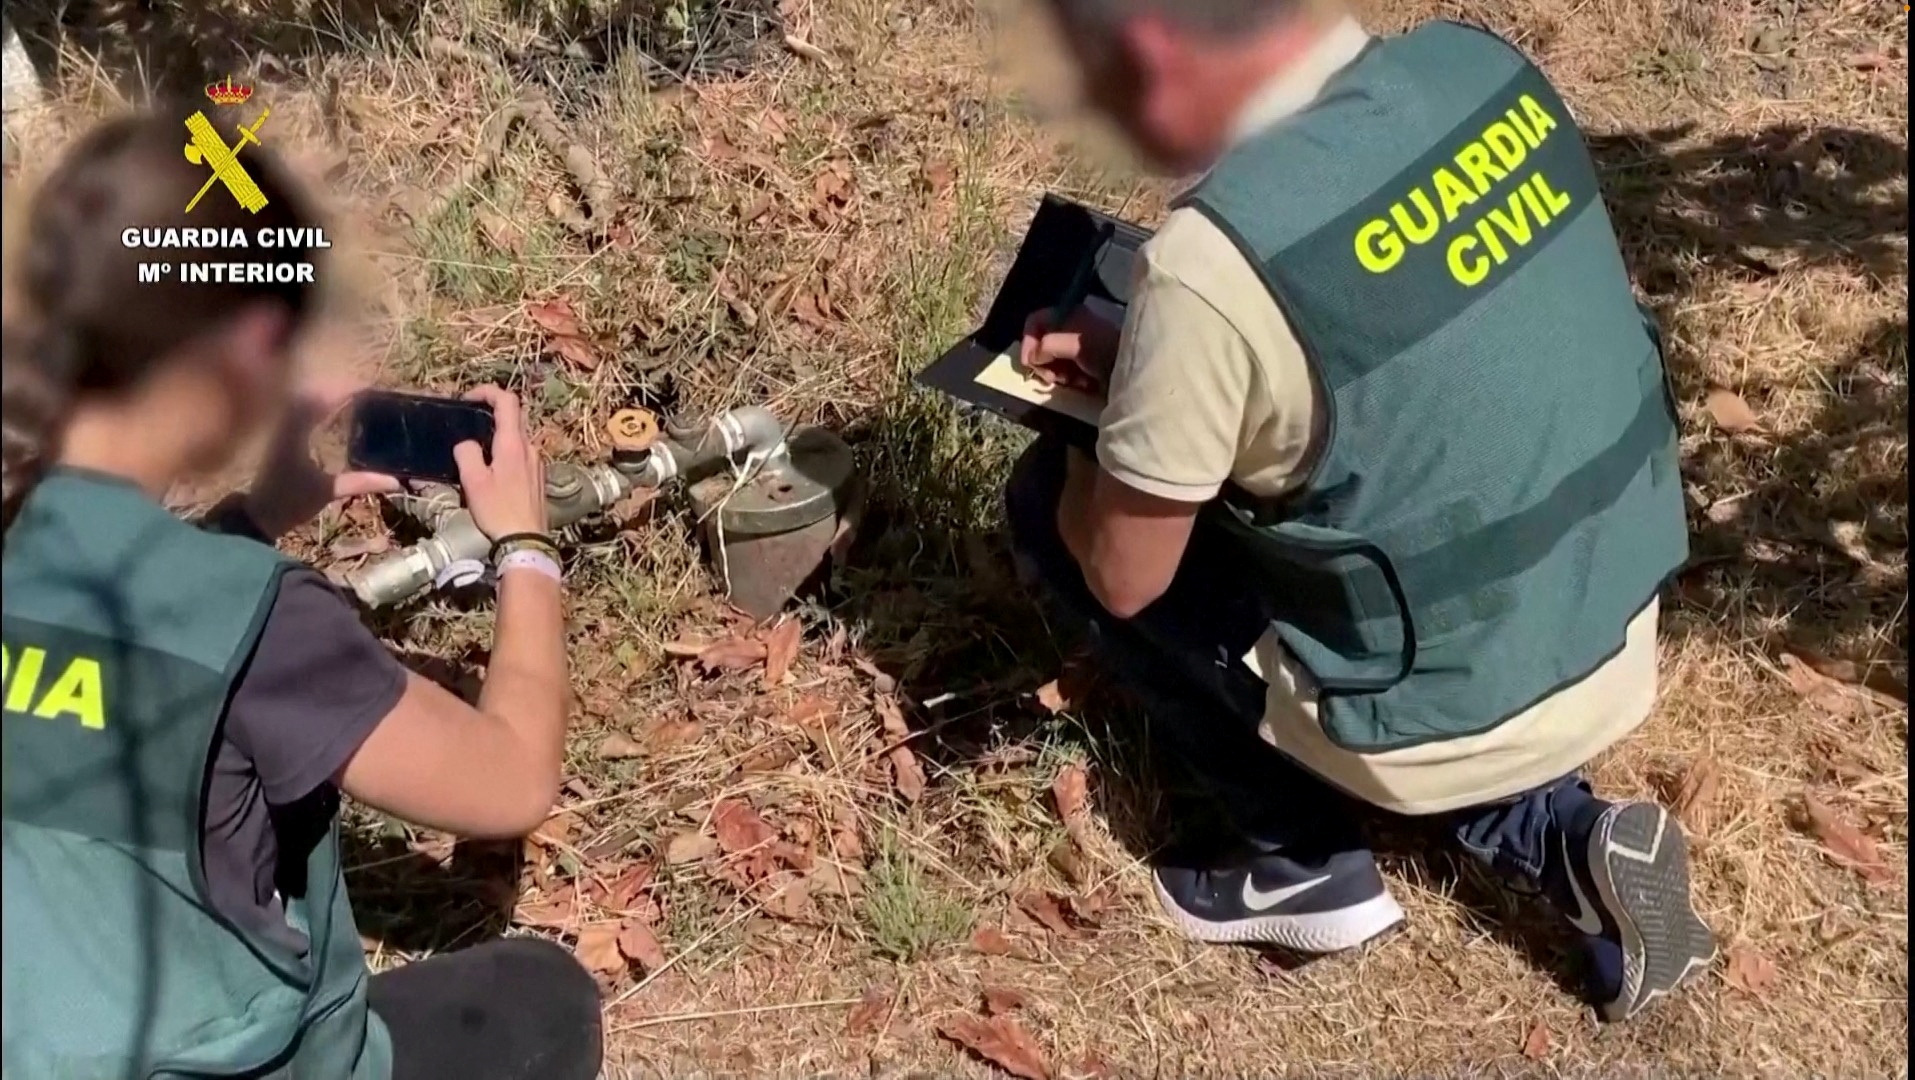 Spanish police officers document illegal water pipes in Malaga province